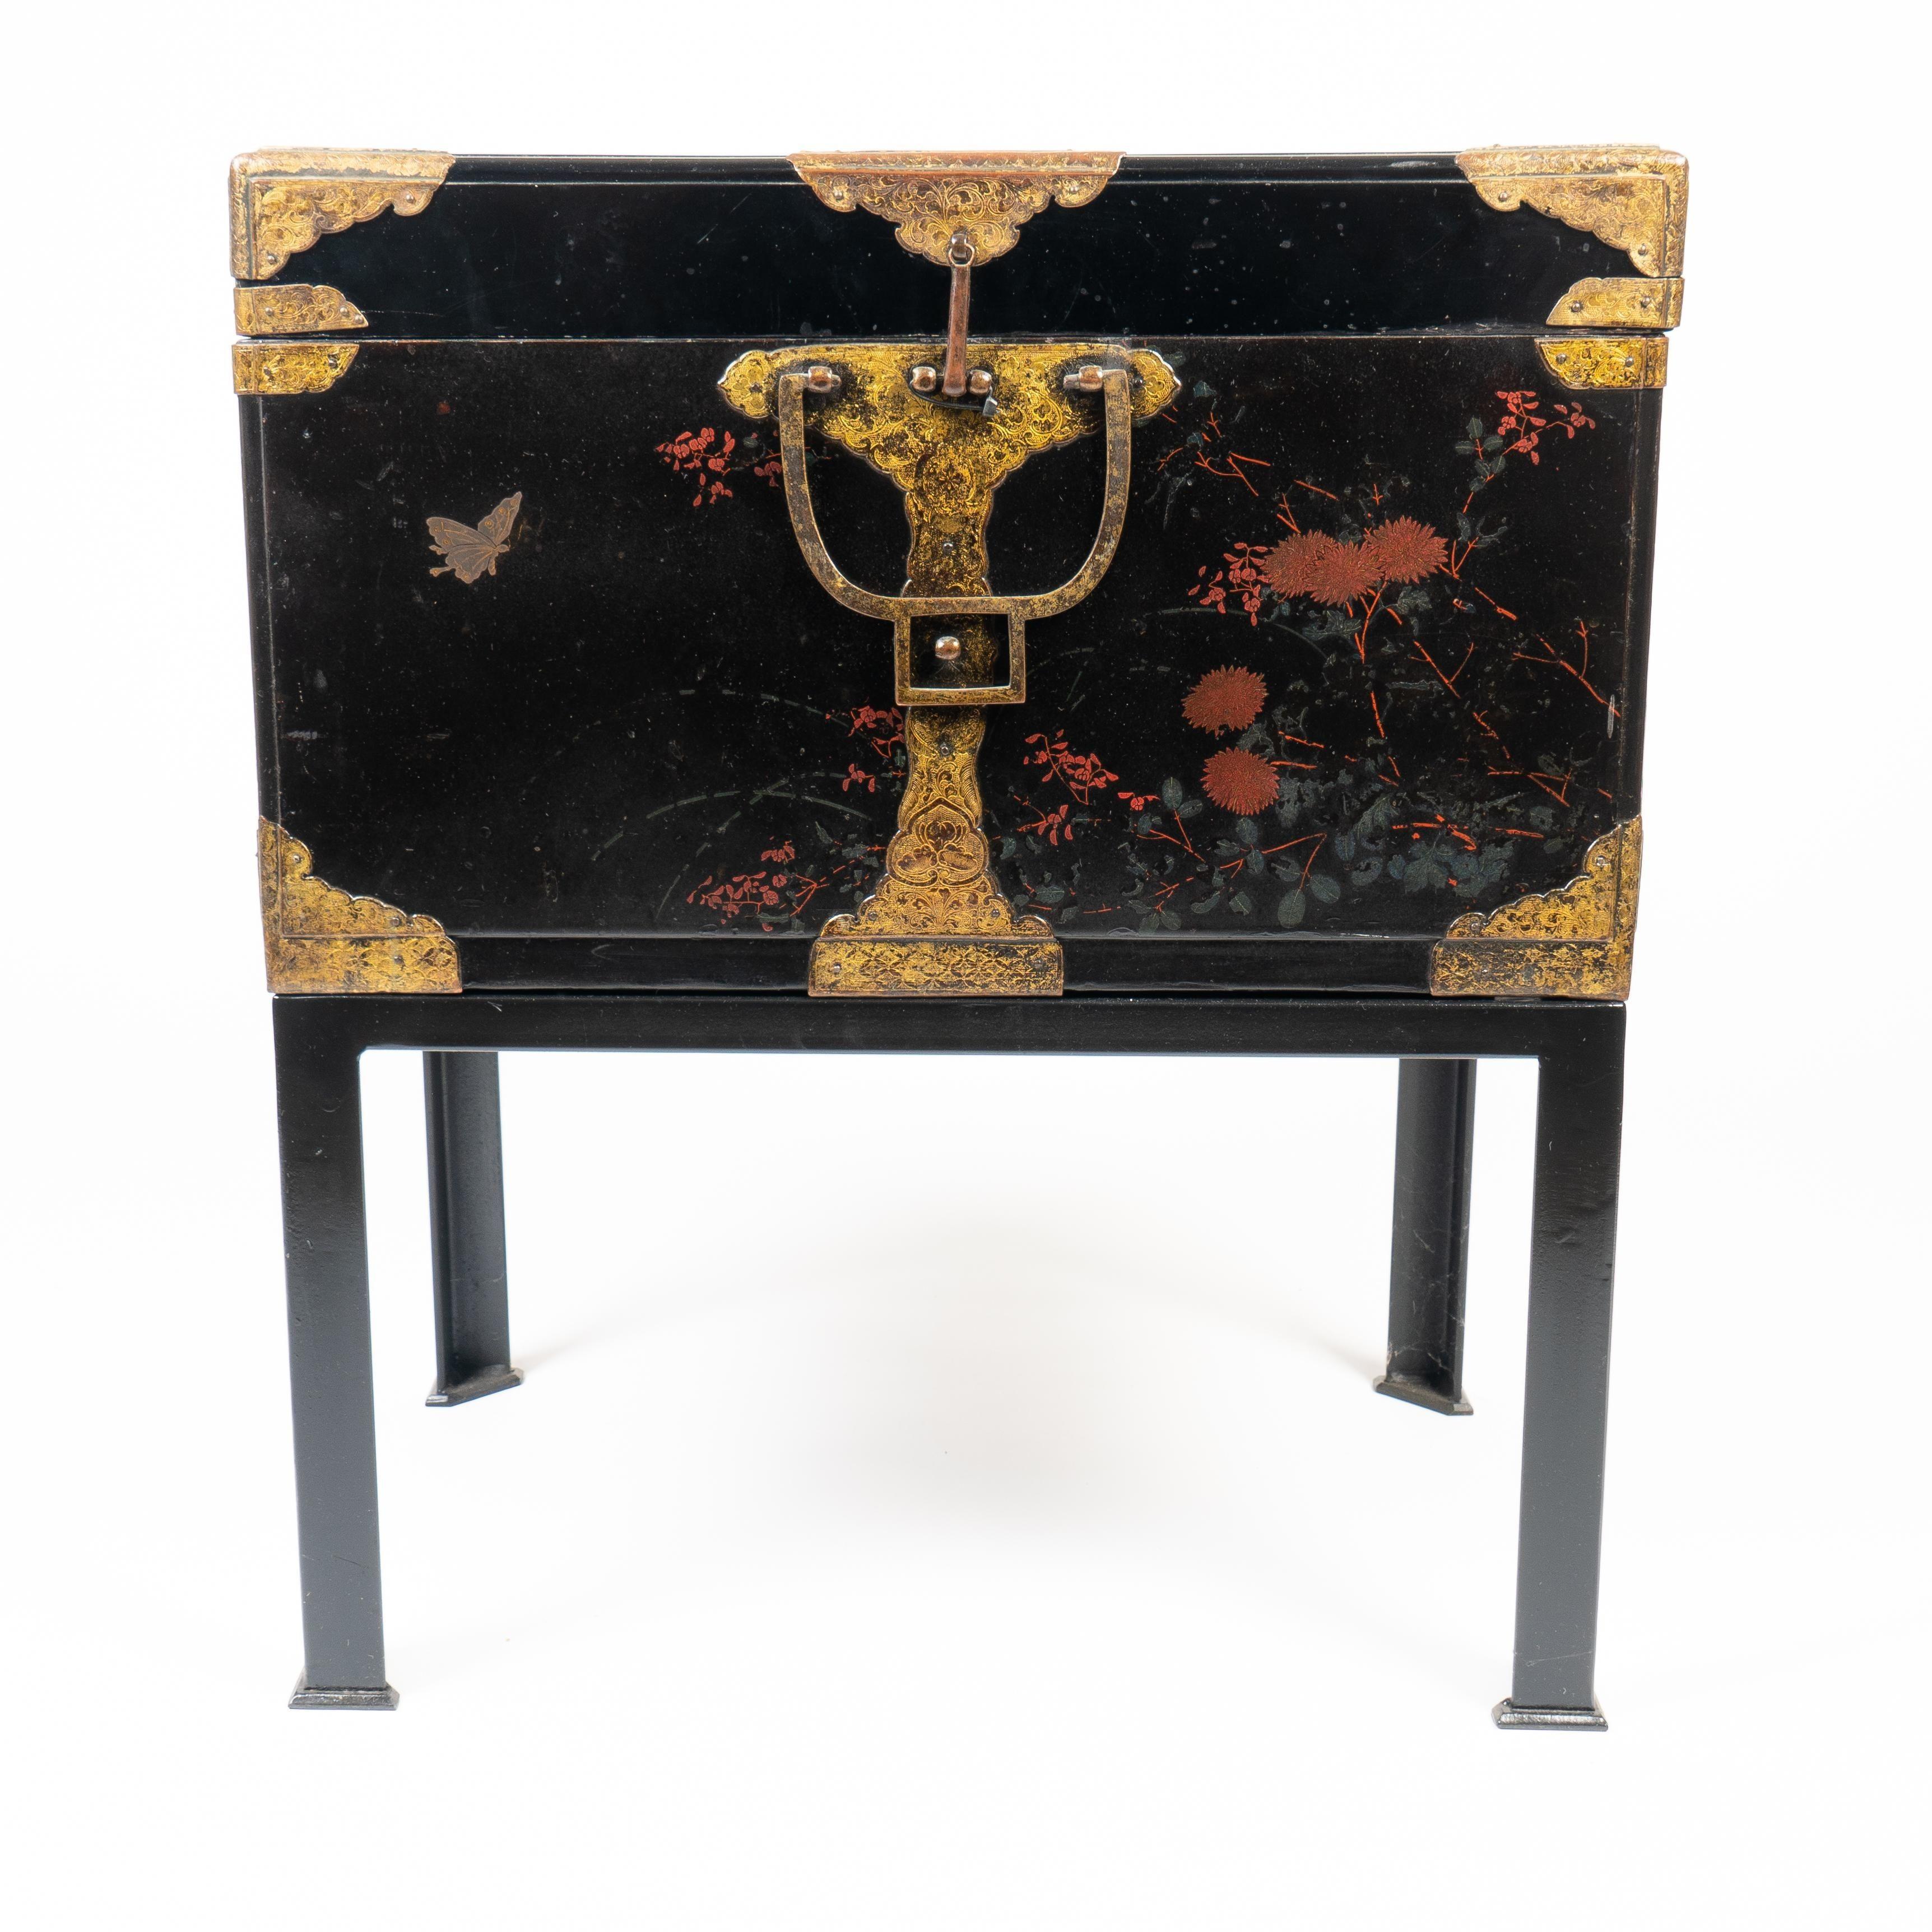 Japanese black lacquered wood trunk with engraved cast brass corner mounts and bails for the lift off cover. The brasses retain traces of their original gilding. All four sides of the case have been decorated in a restrained design of flowers and